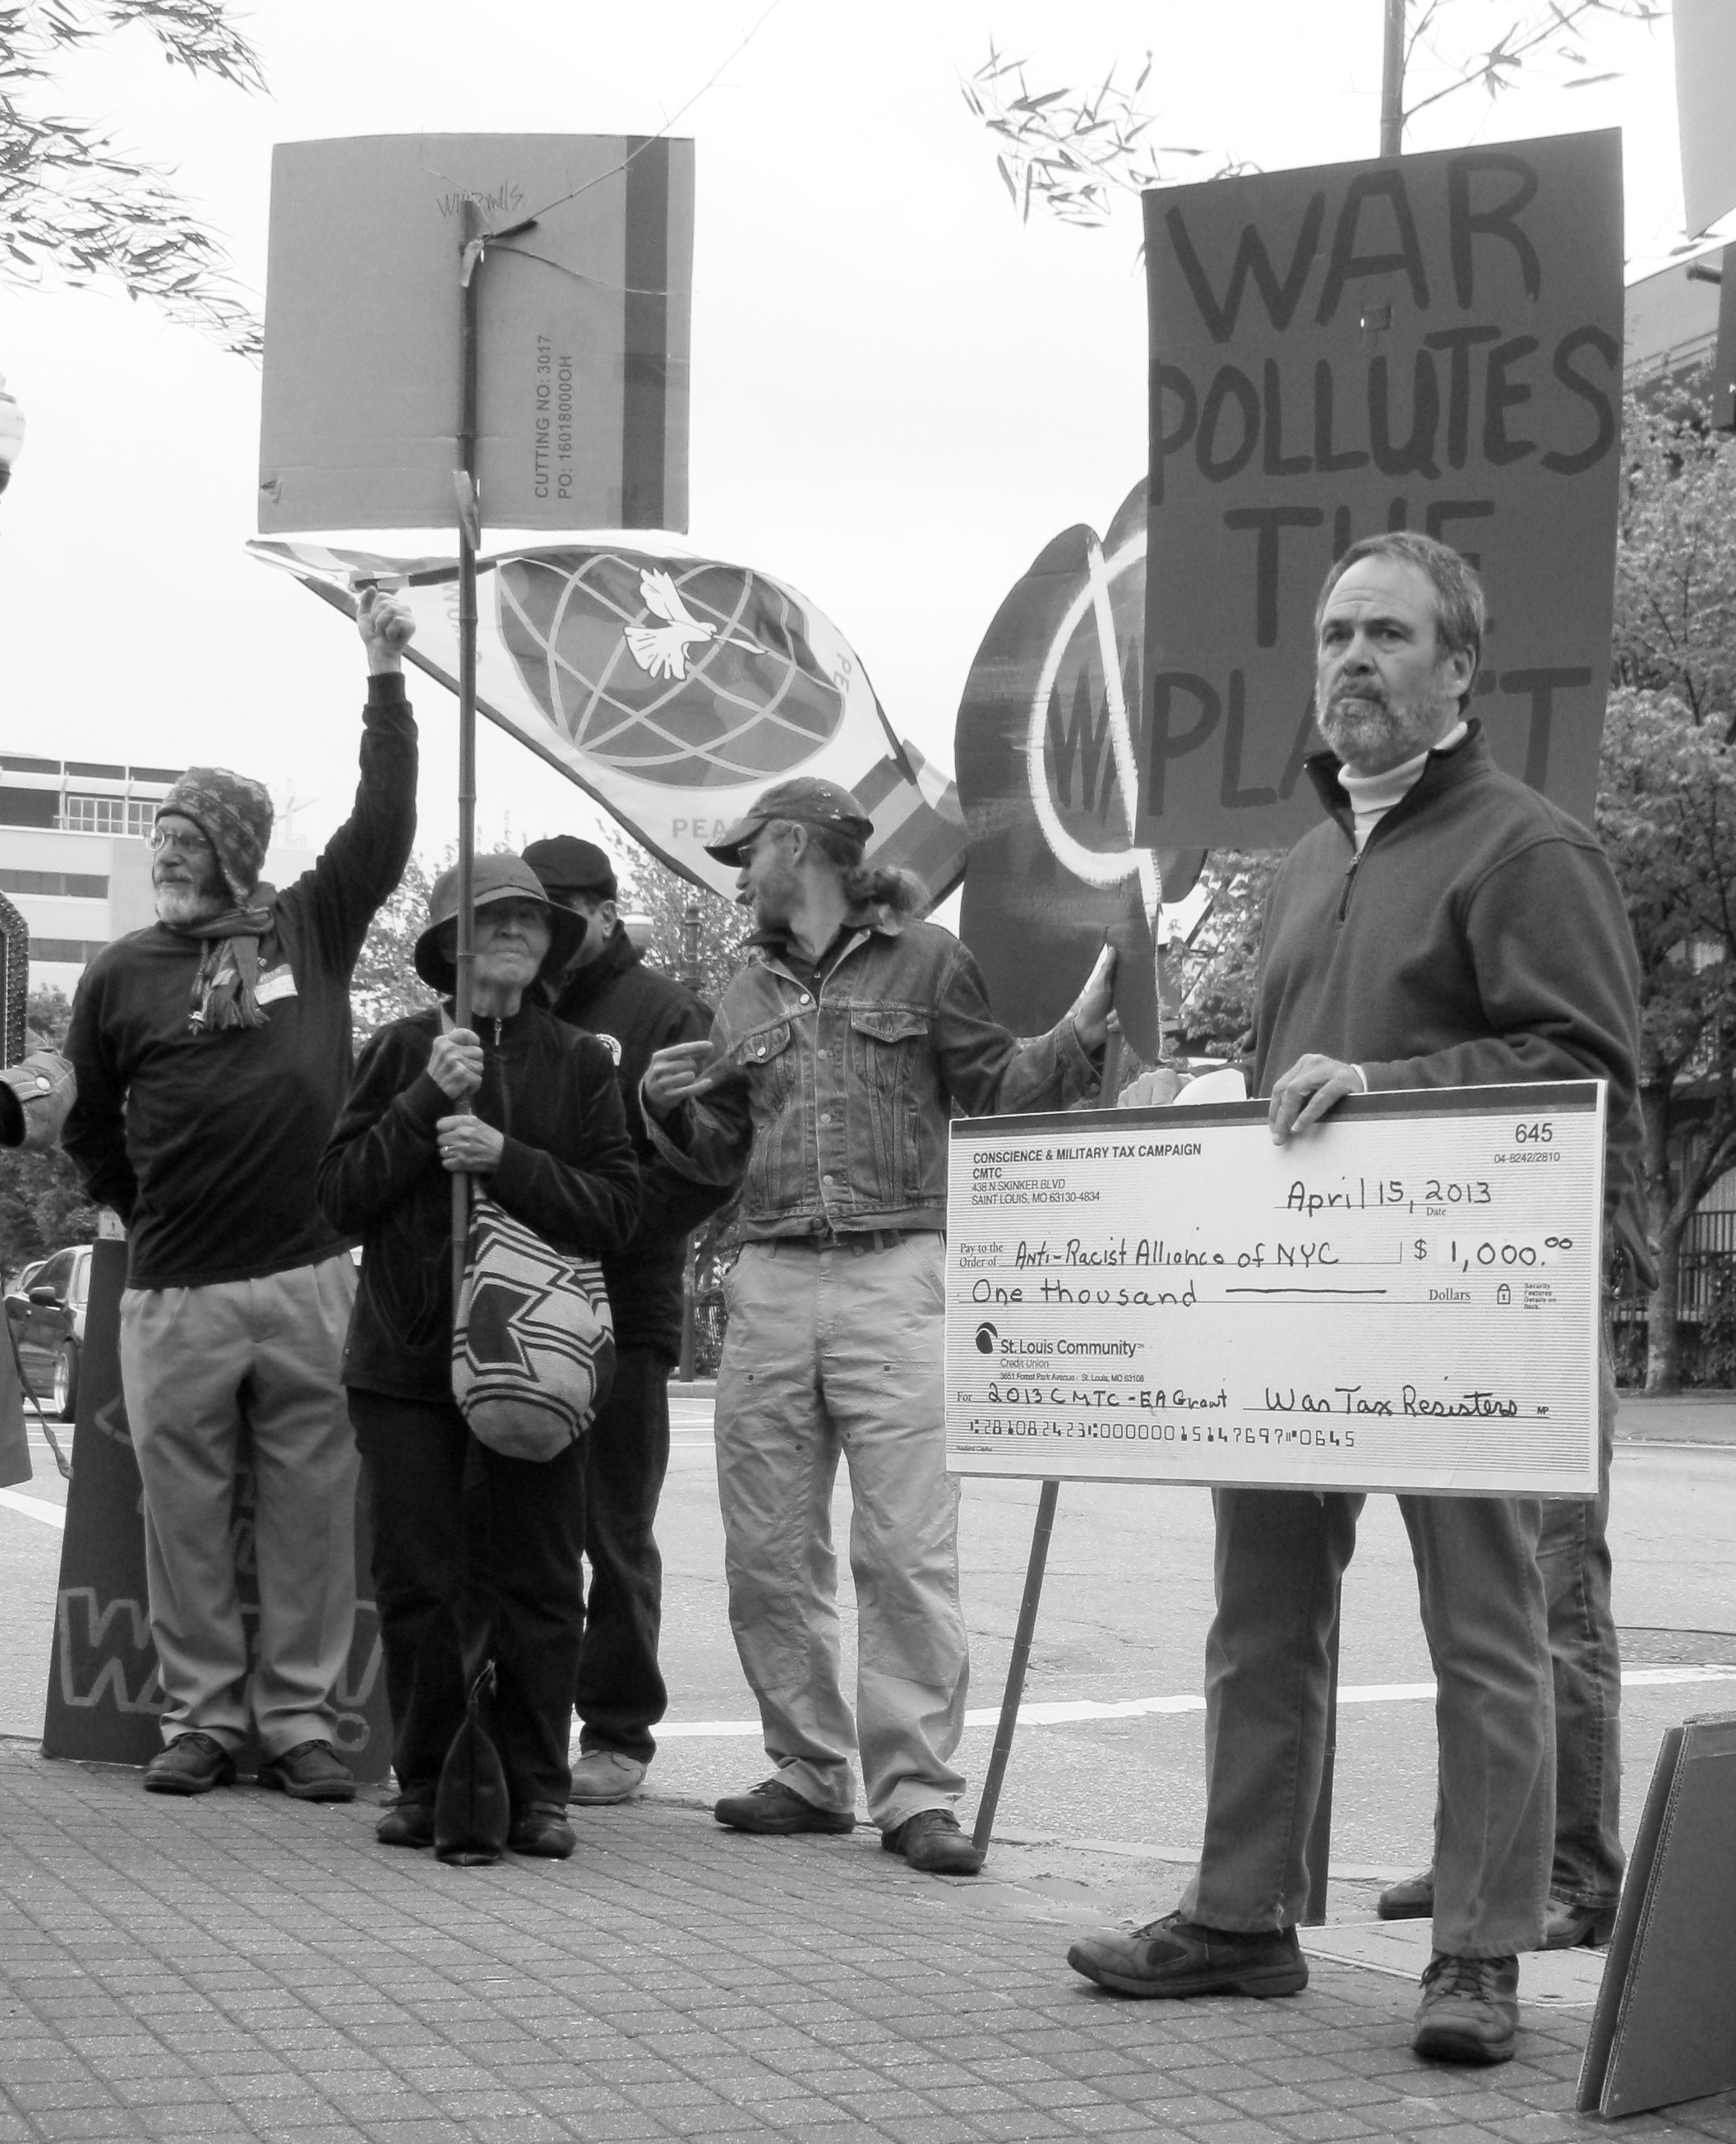 A man holds an oversized check for $1,000 made out to “Anti-Racist Alliance of N.Y.C.” from Conscience & Military Tax Campaign